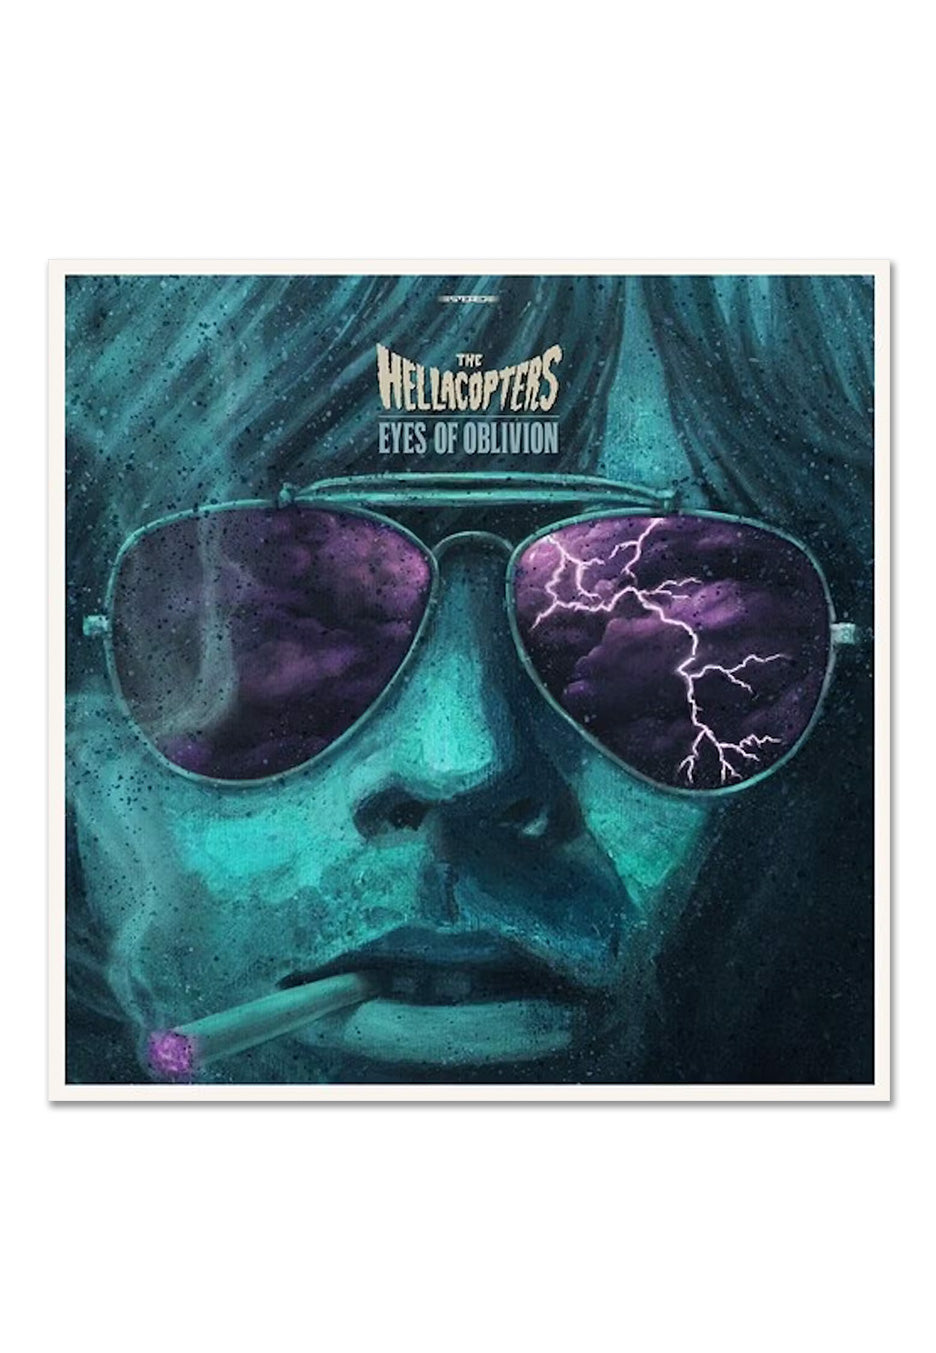 The Hellacopters - Eyes Of Oblivion Ltd. Transparent Petrol - Colored Vinyl